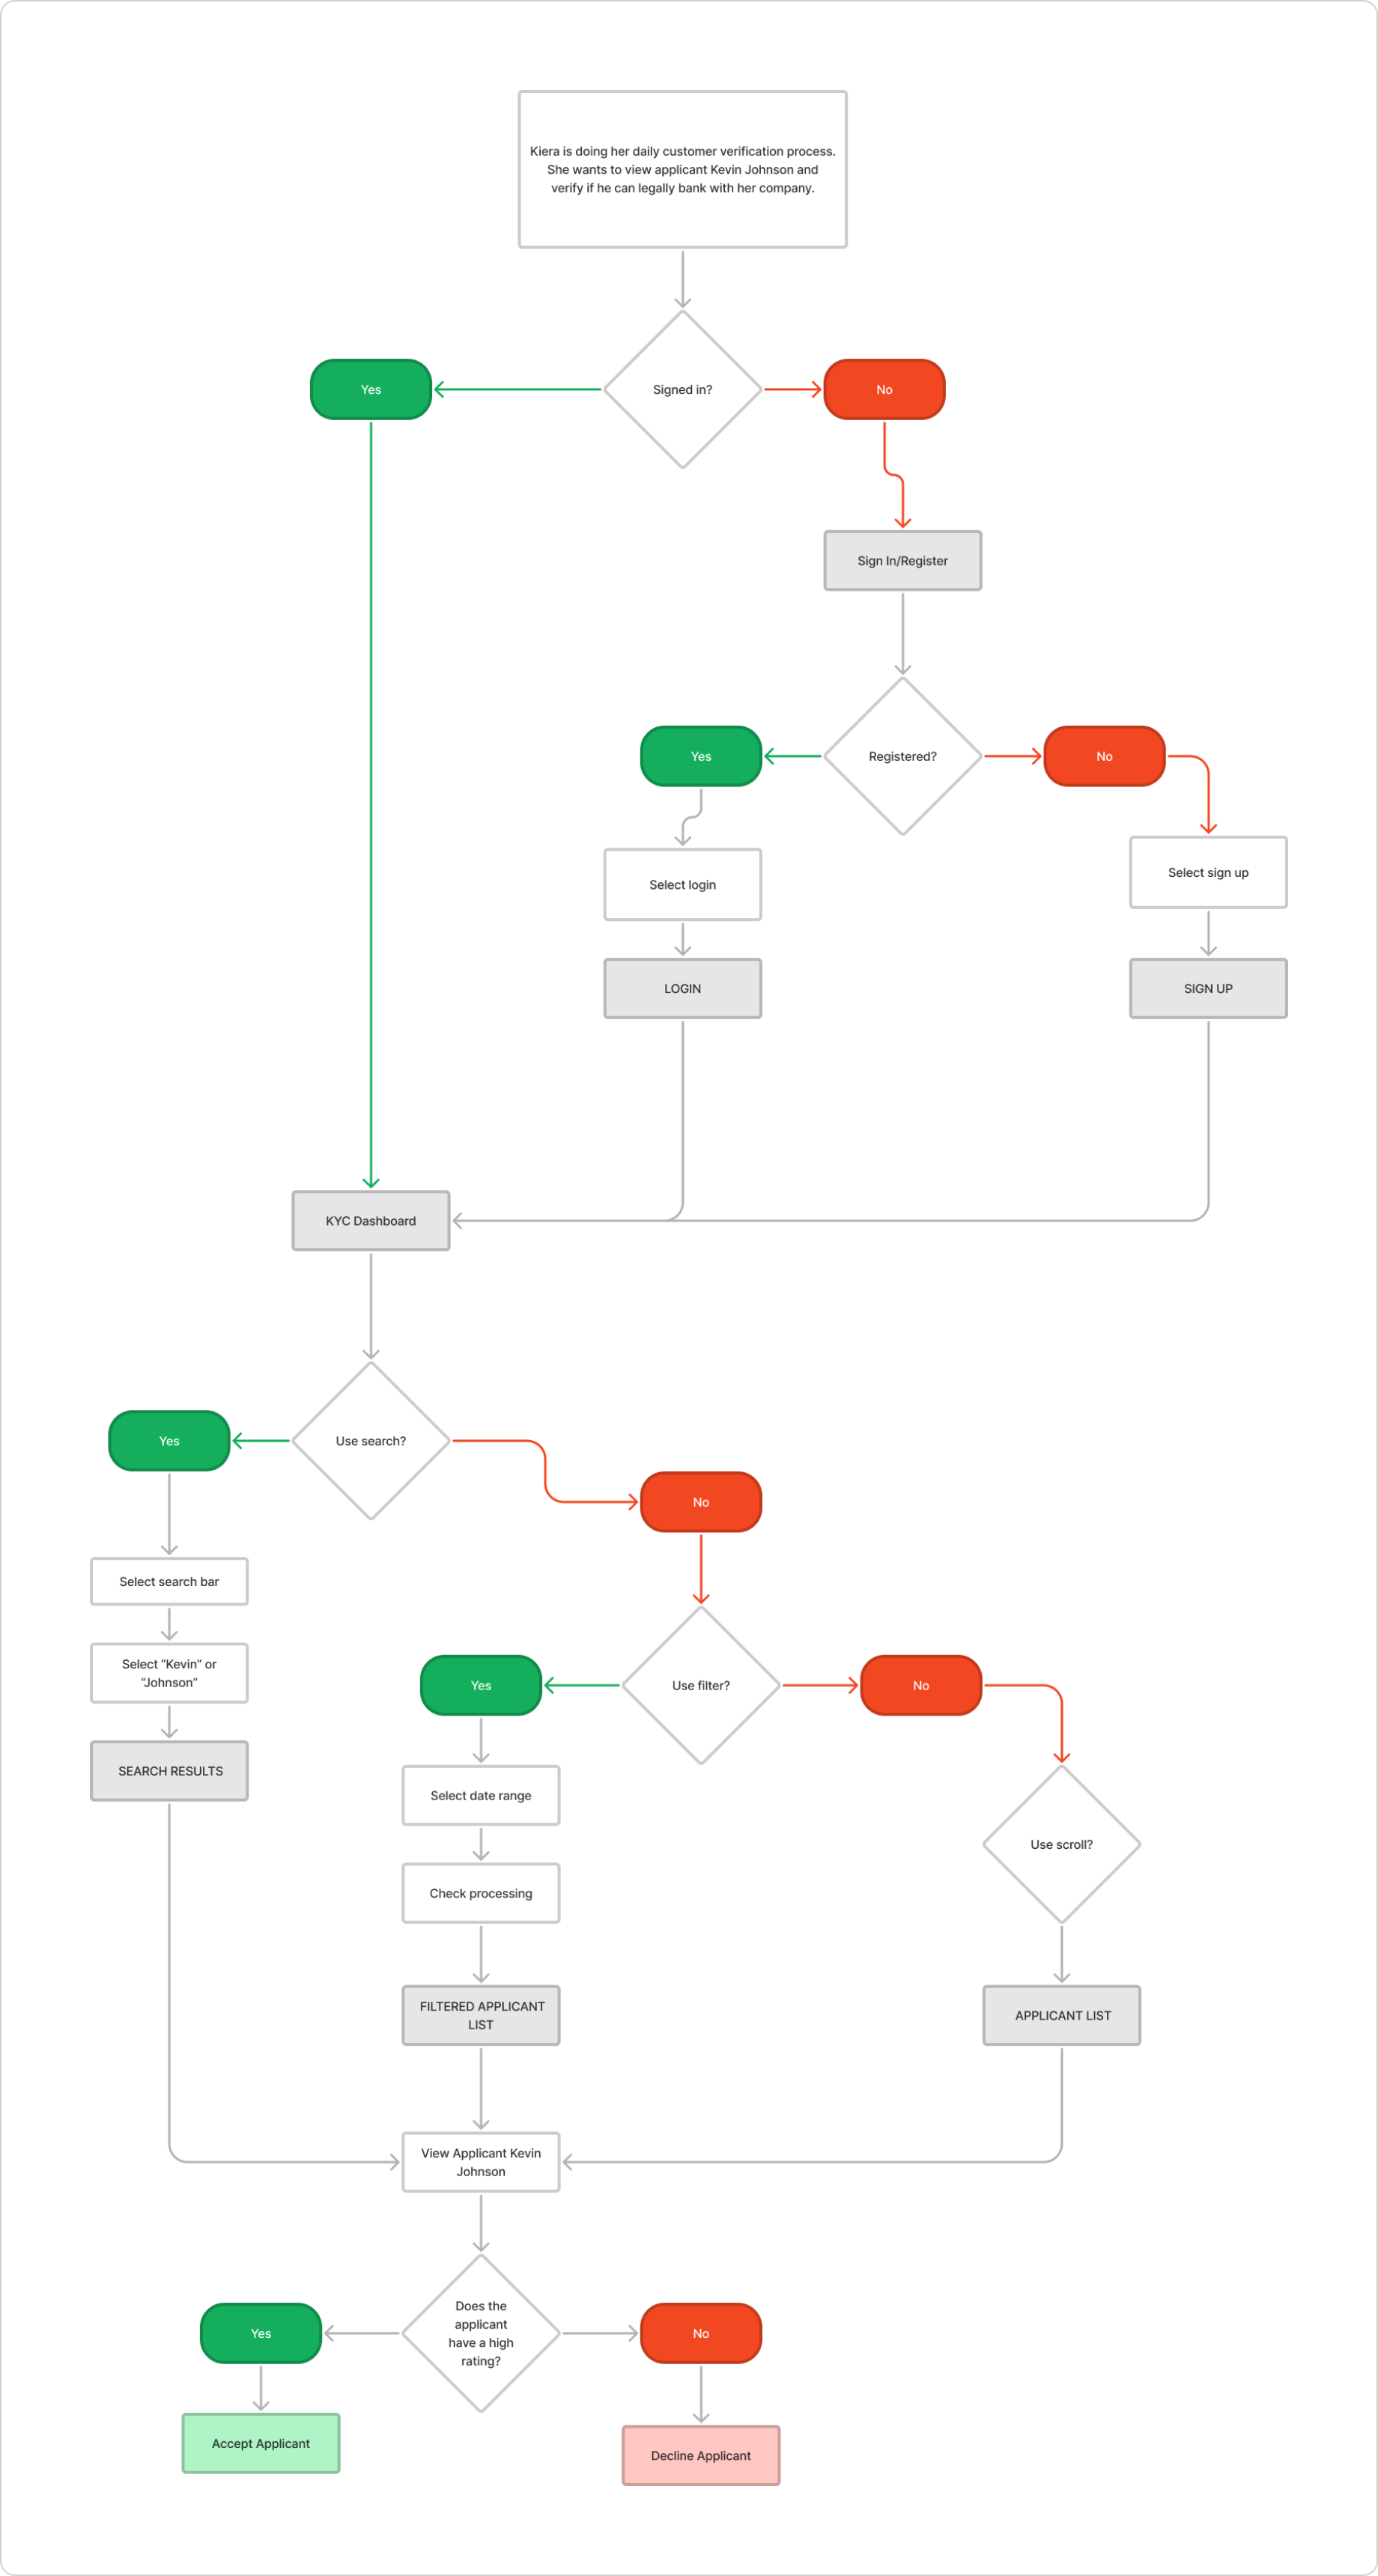 User flow showing the verification journey